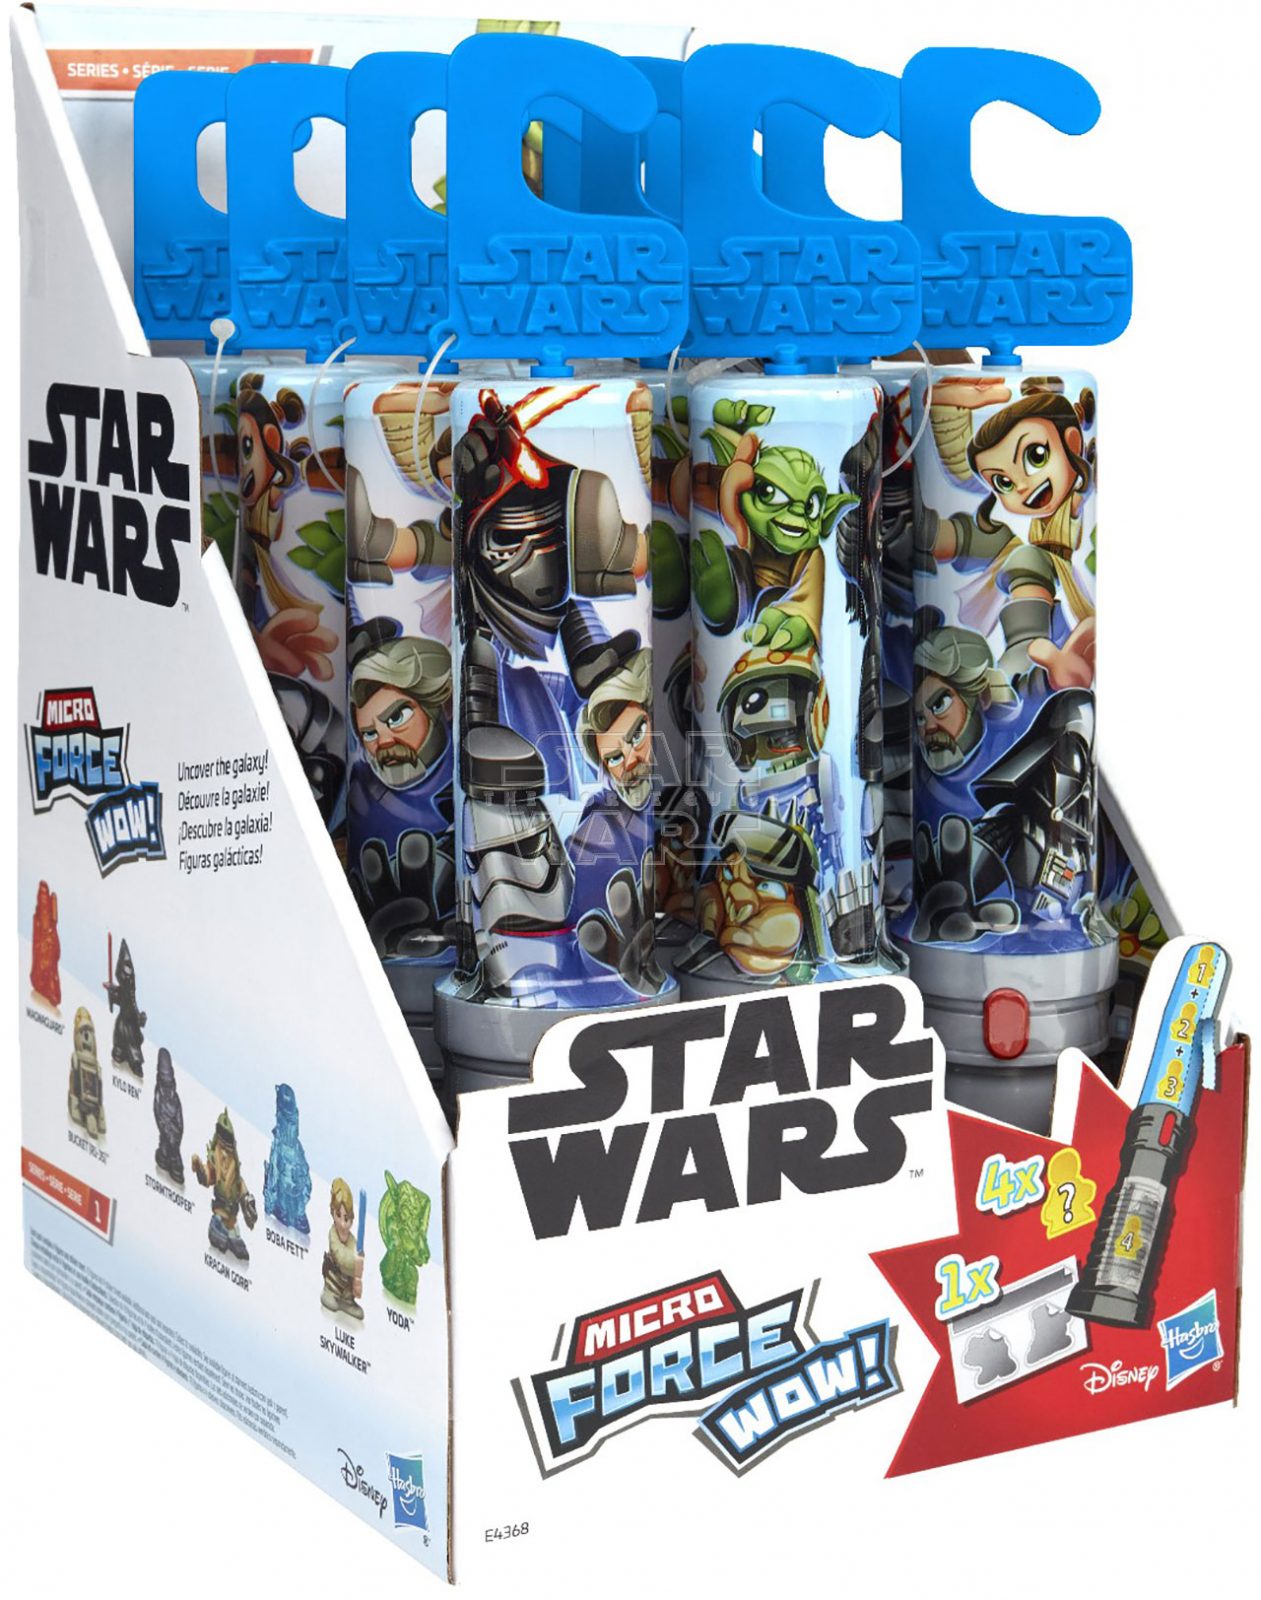 STAR WARS MICRO FORCE WOW SERIES 1 In Pck (1)